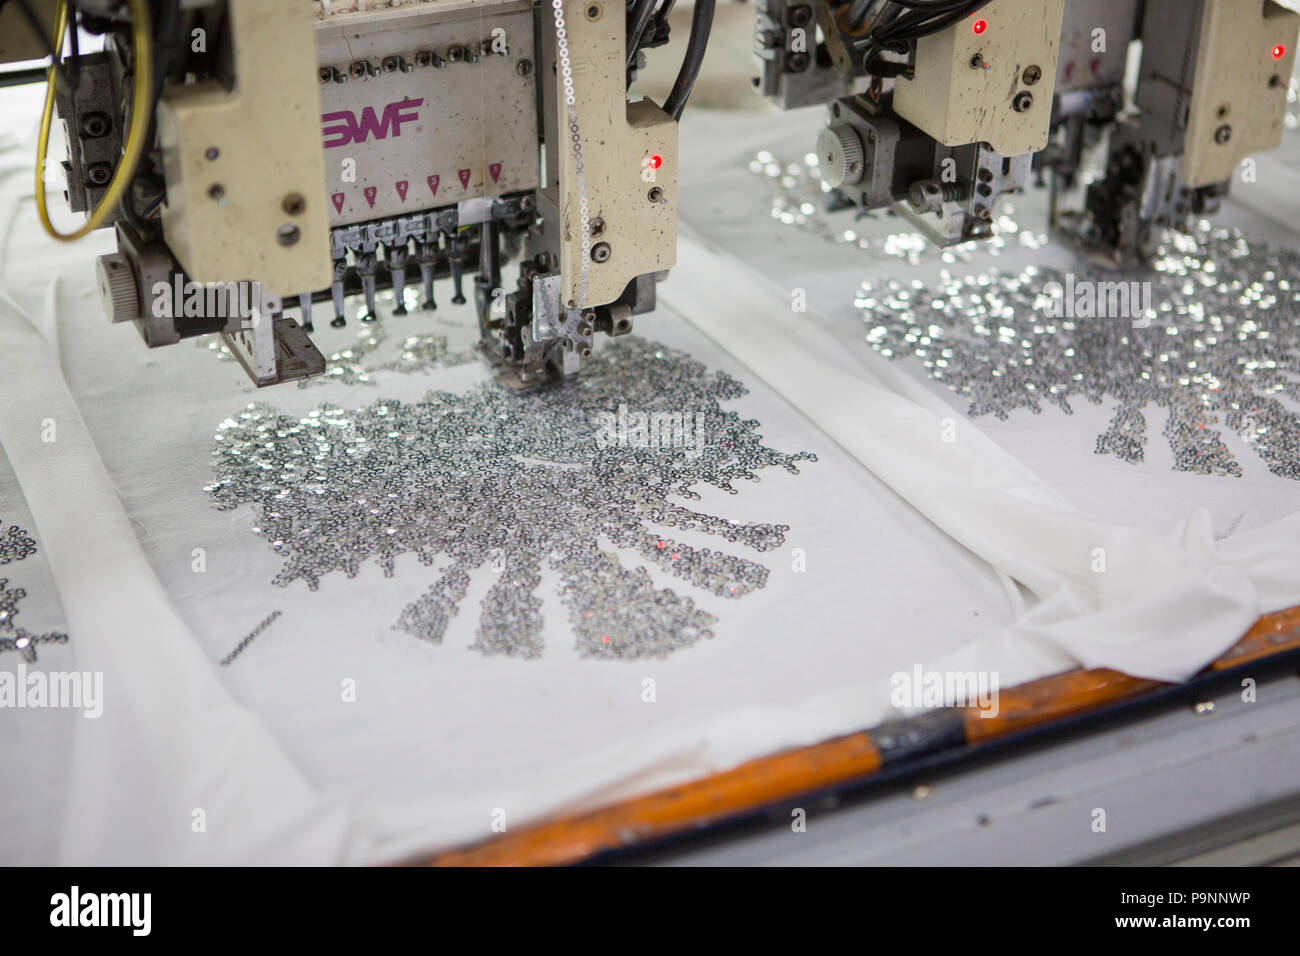 Sewing machines, print a sequin design on a bio cotton T-shirt at a factory, where organic cotton is being used to make clothes, Indore, India Stock Photo